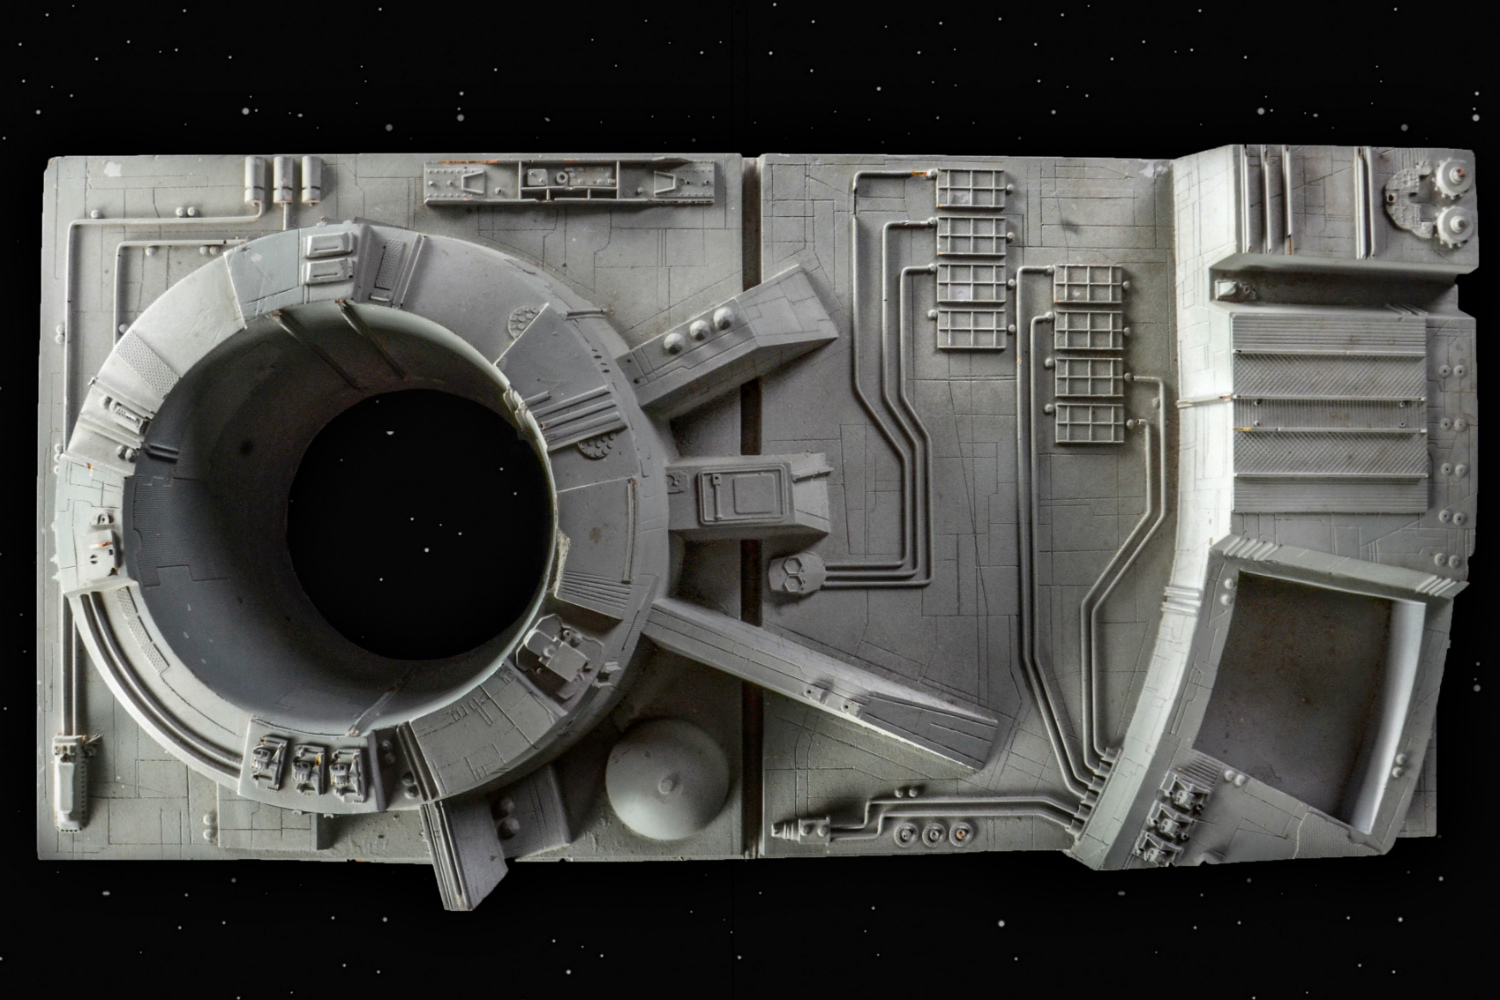 Death Star from Star Wars: Episode IV - A New Hope auction